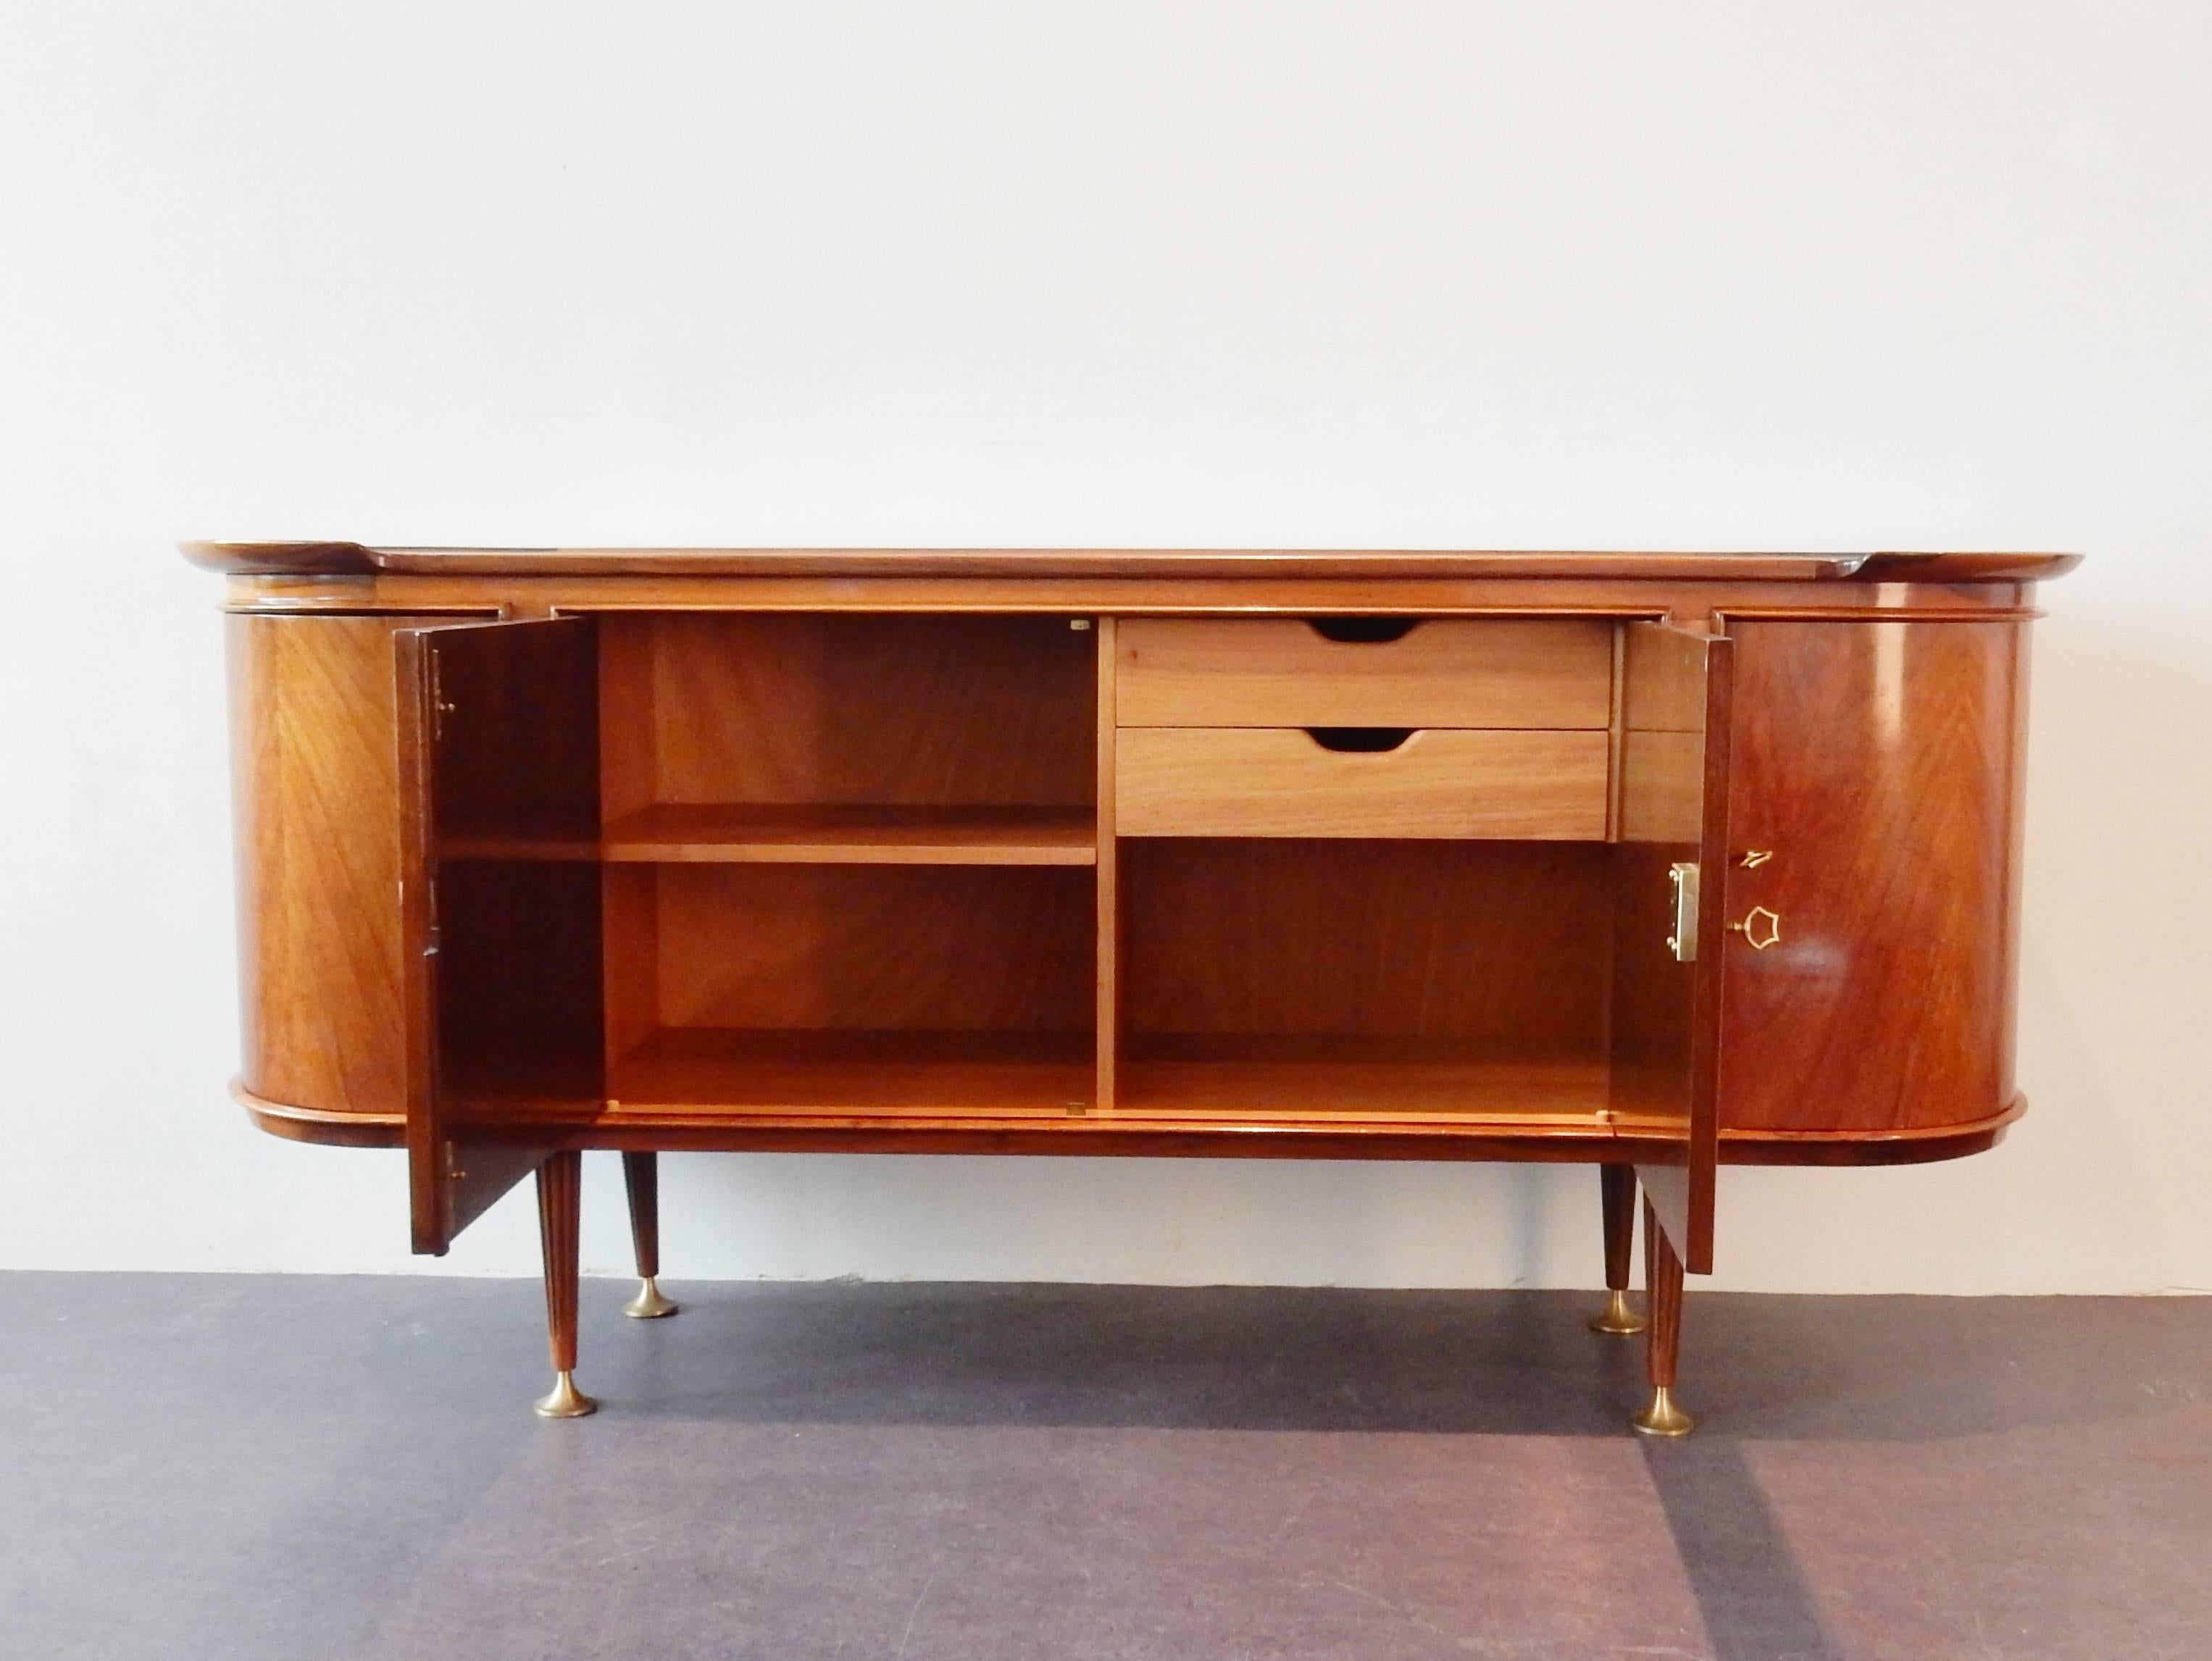 Mid-Century Modern Sideboard in Mahogany by A.A. Patijn for Zijlstra Joure, Netherlands, 1950s